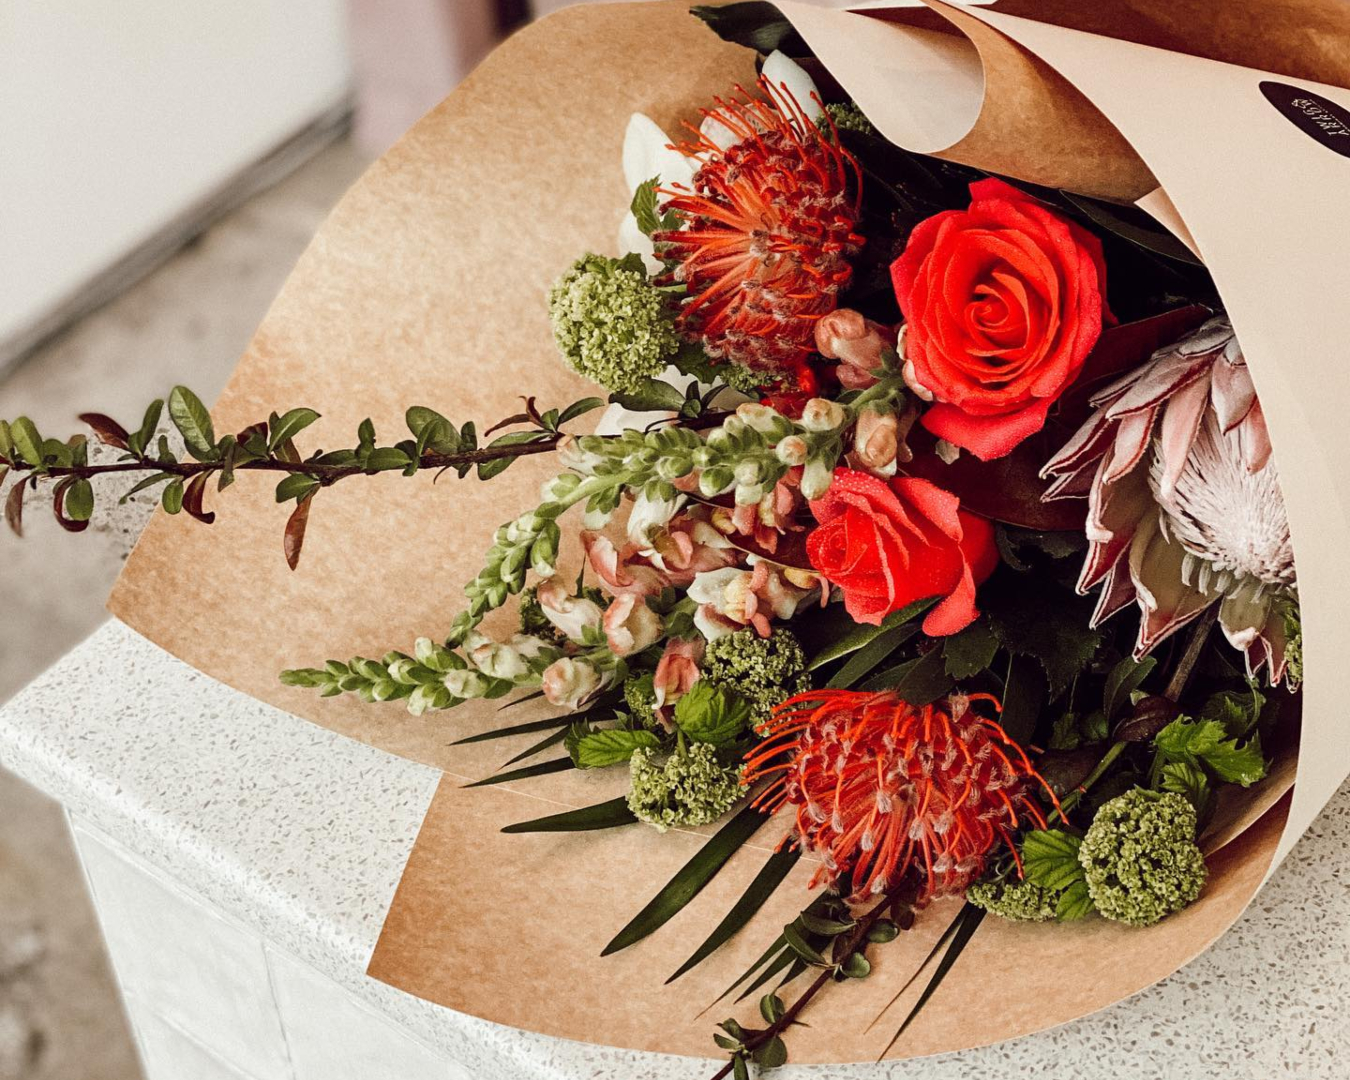 Flowers of red and pink are gorgeously arranged in this bouquet from Twig & Arrow